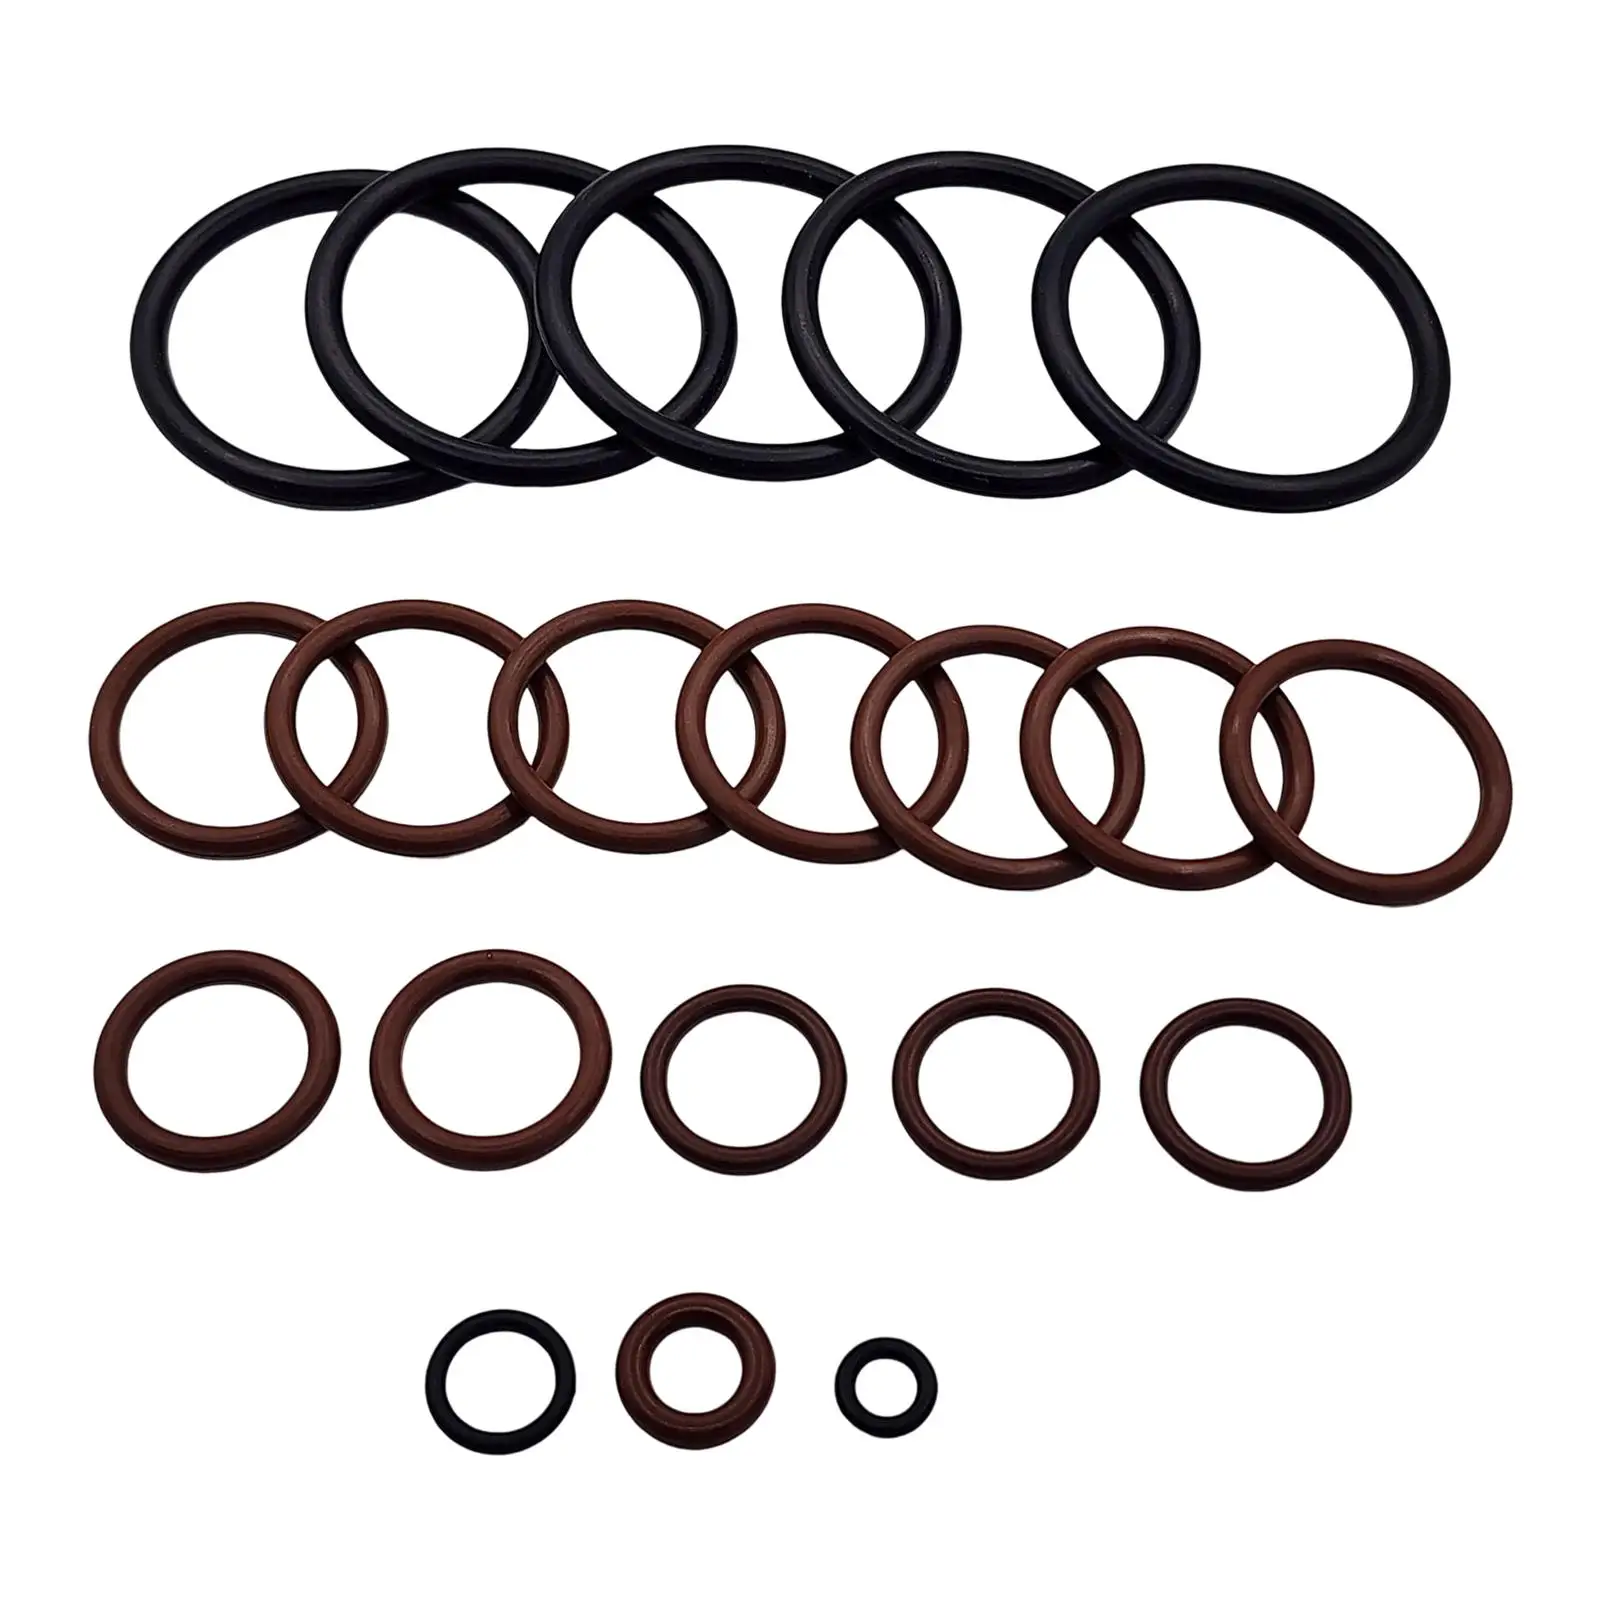 Cooling System O-Ring Kit Durable Washer Rubber for BMW E46 M52 M54 Car